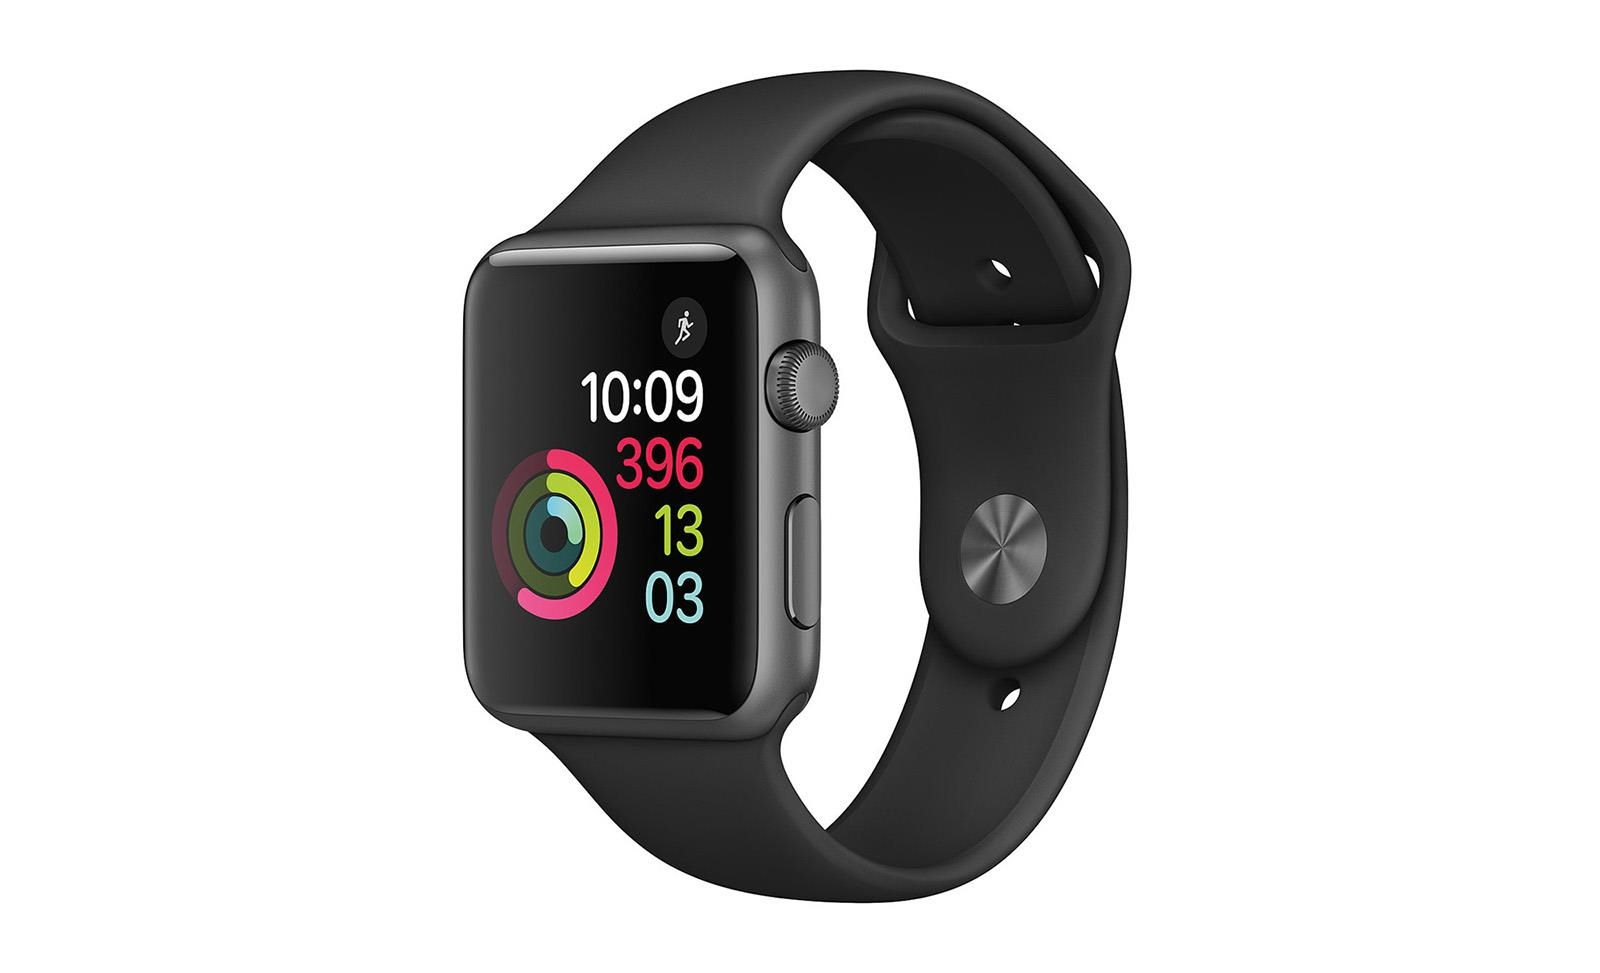 The Wirecutter's best deals: The Apple Watch Series 1 (42mm) drops to $230 | DeviceDaily.com